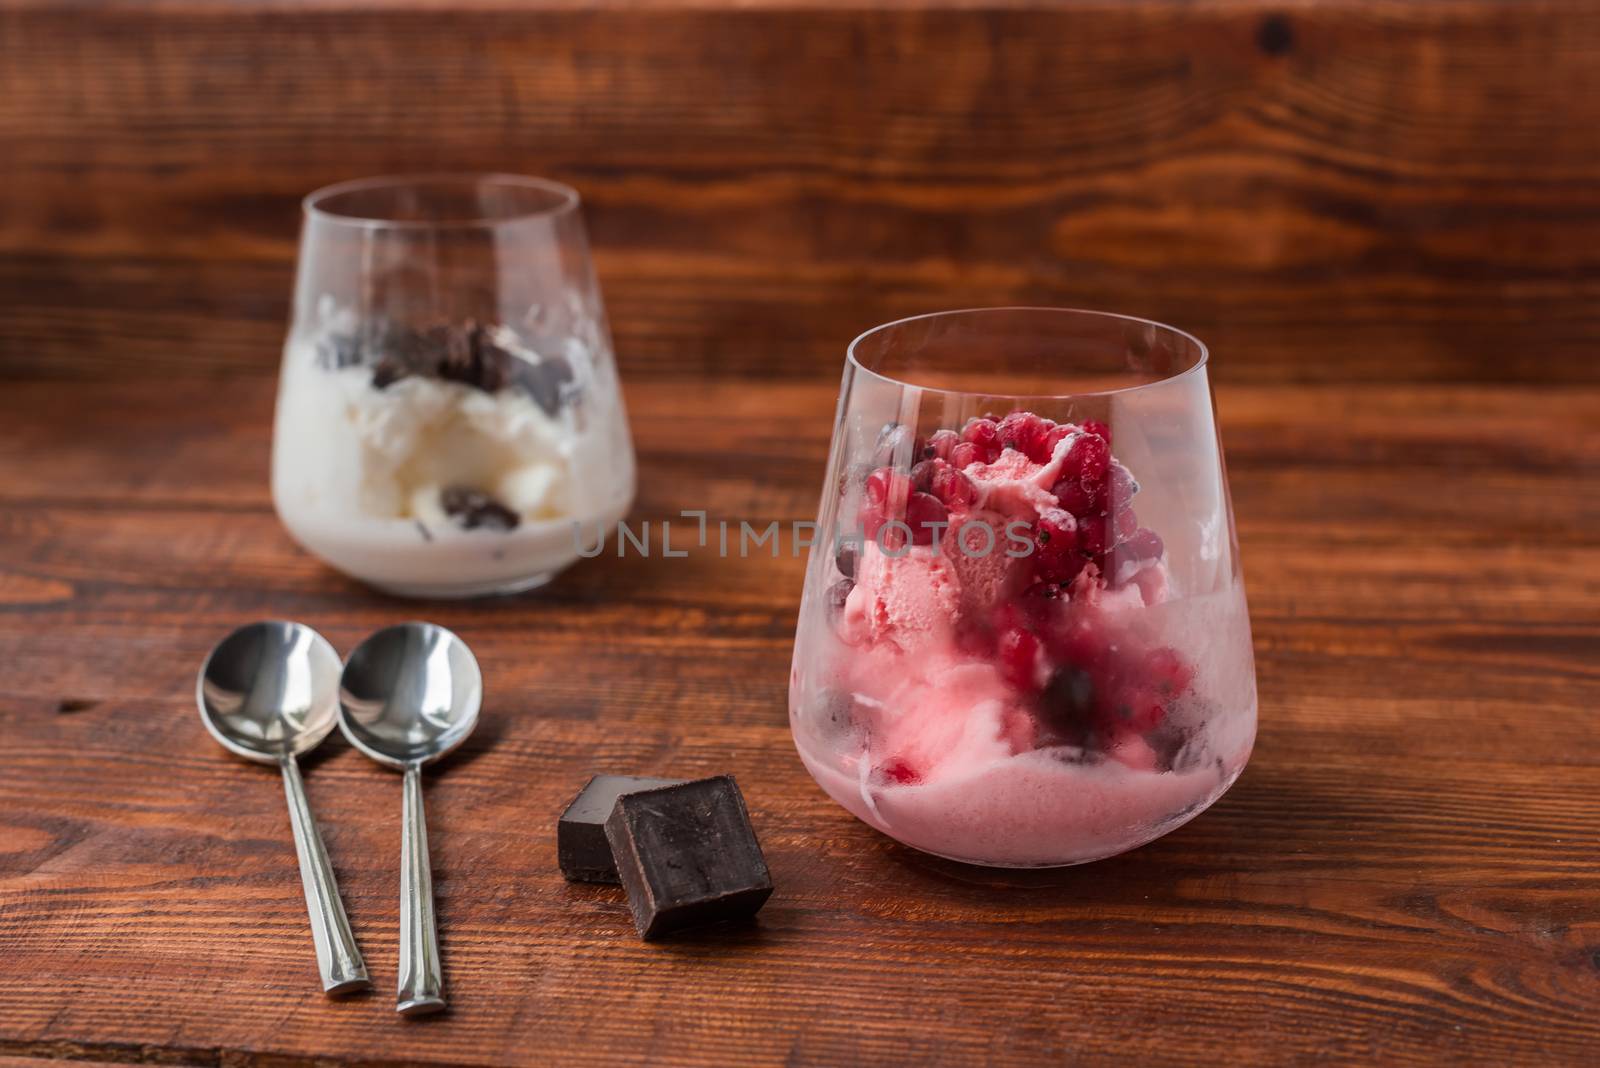 Sweet desert with ice cream, chocolate and berries on wooden table by Seva_blsv